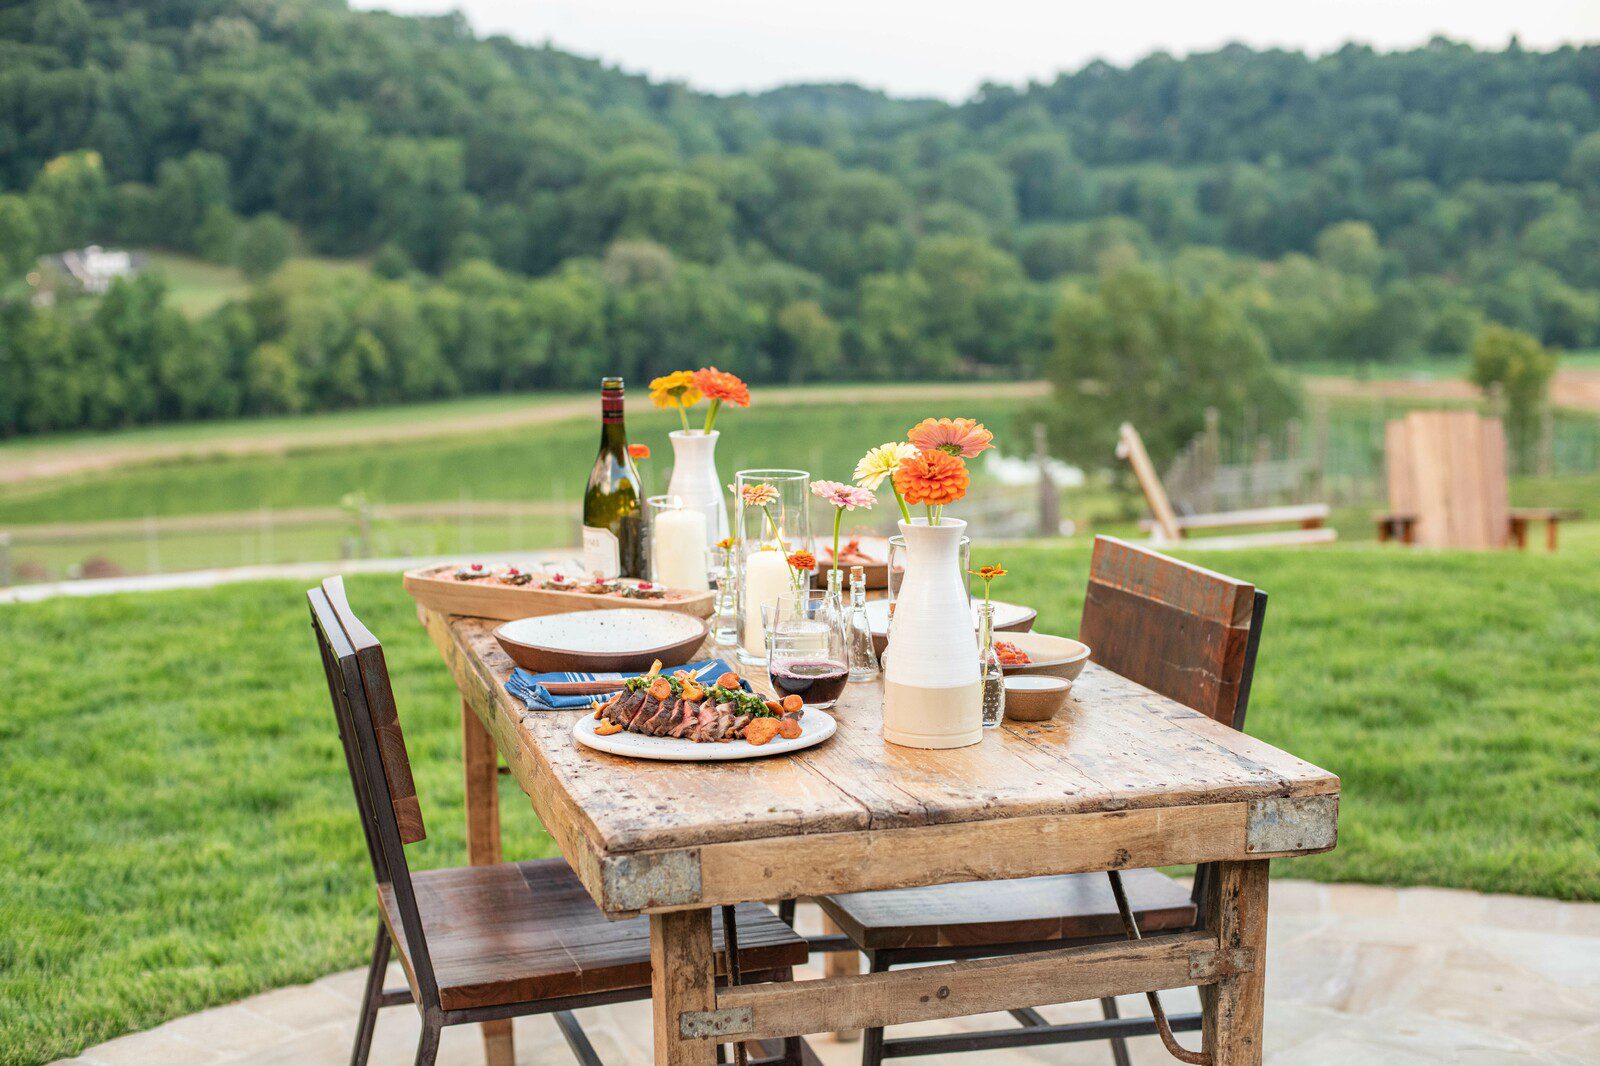 Table set for dining at Southall Farm & Inn in Franklin Tennessee, a working farm and an inviting inn with dining and spa experiences.